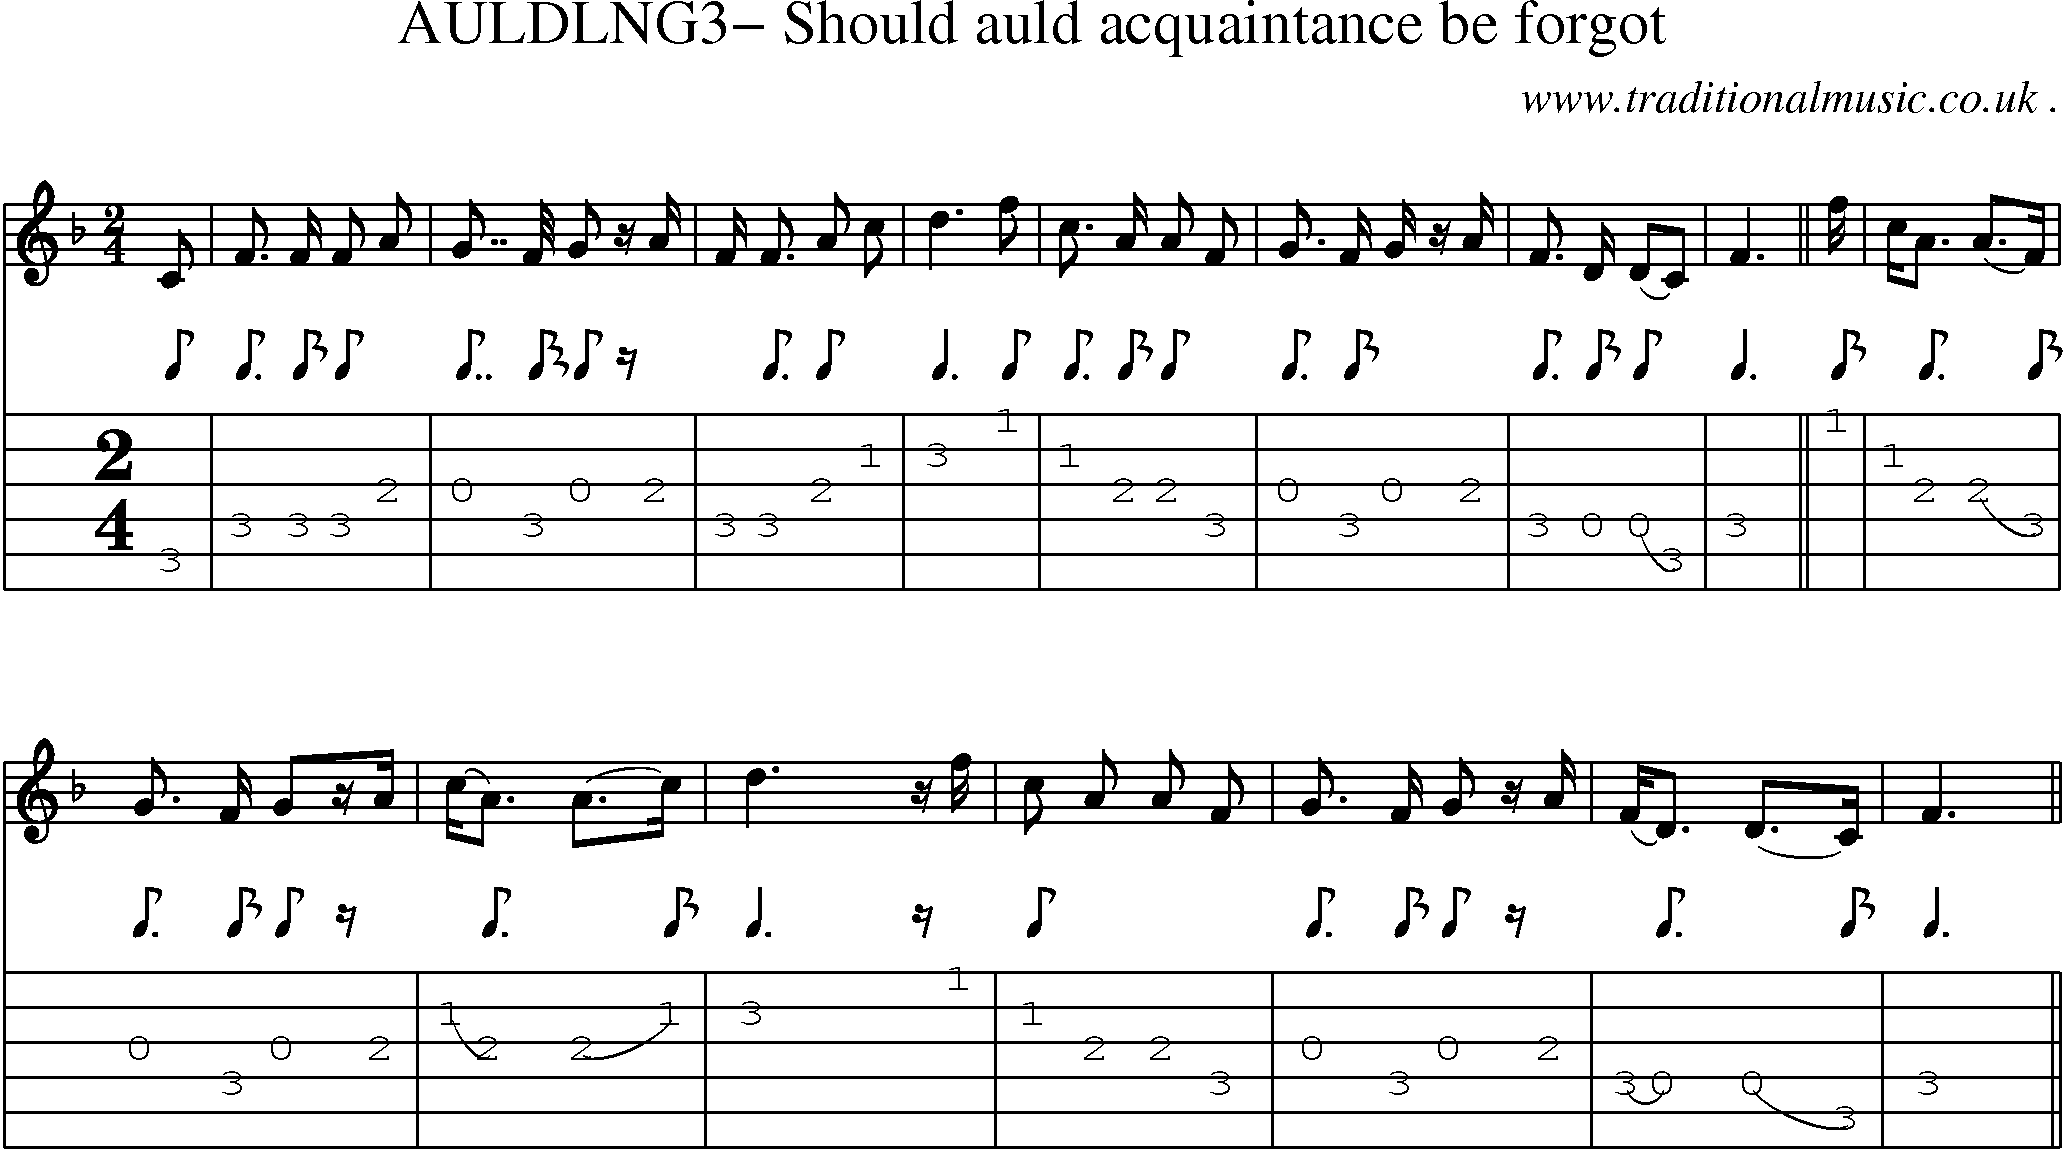 Sheet-Music and Guitar Tabs for Auldlng3 Should Auld Acquaintance Be Forgot